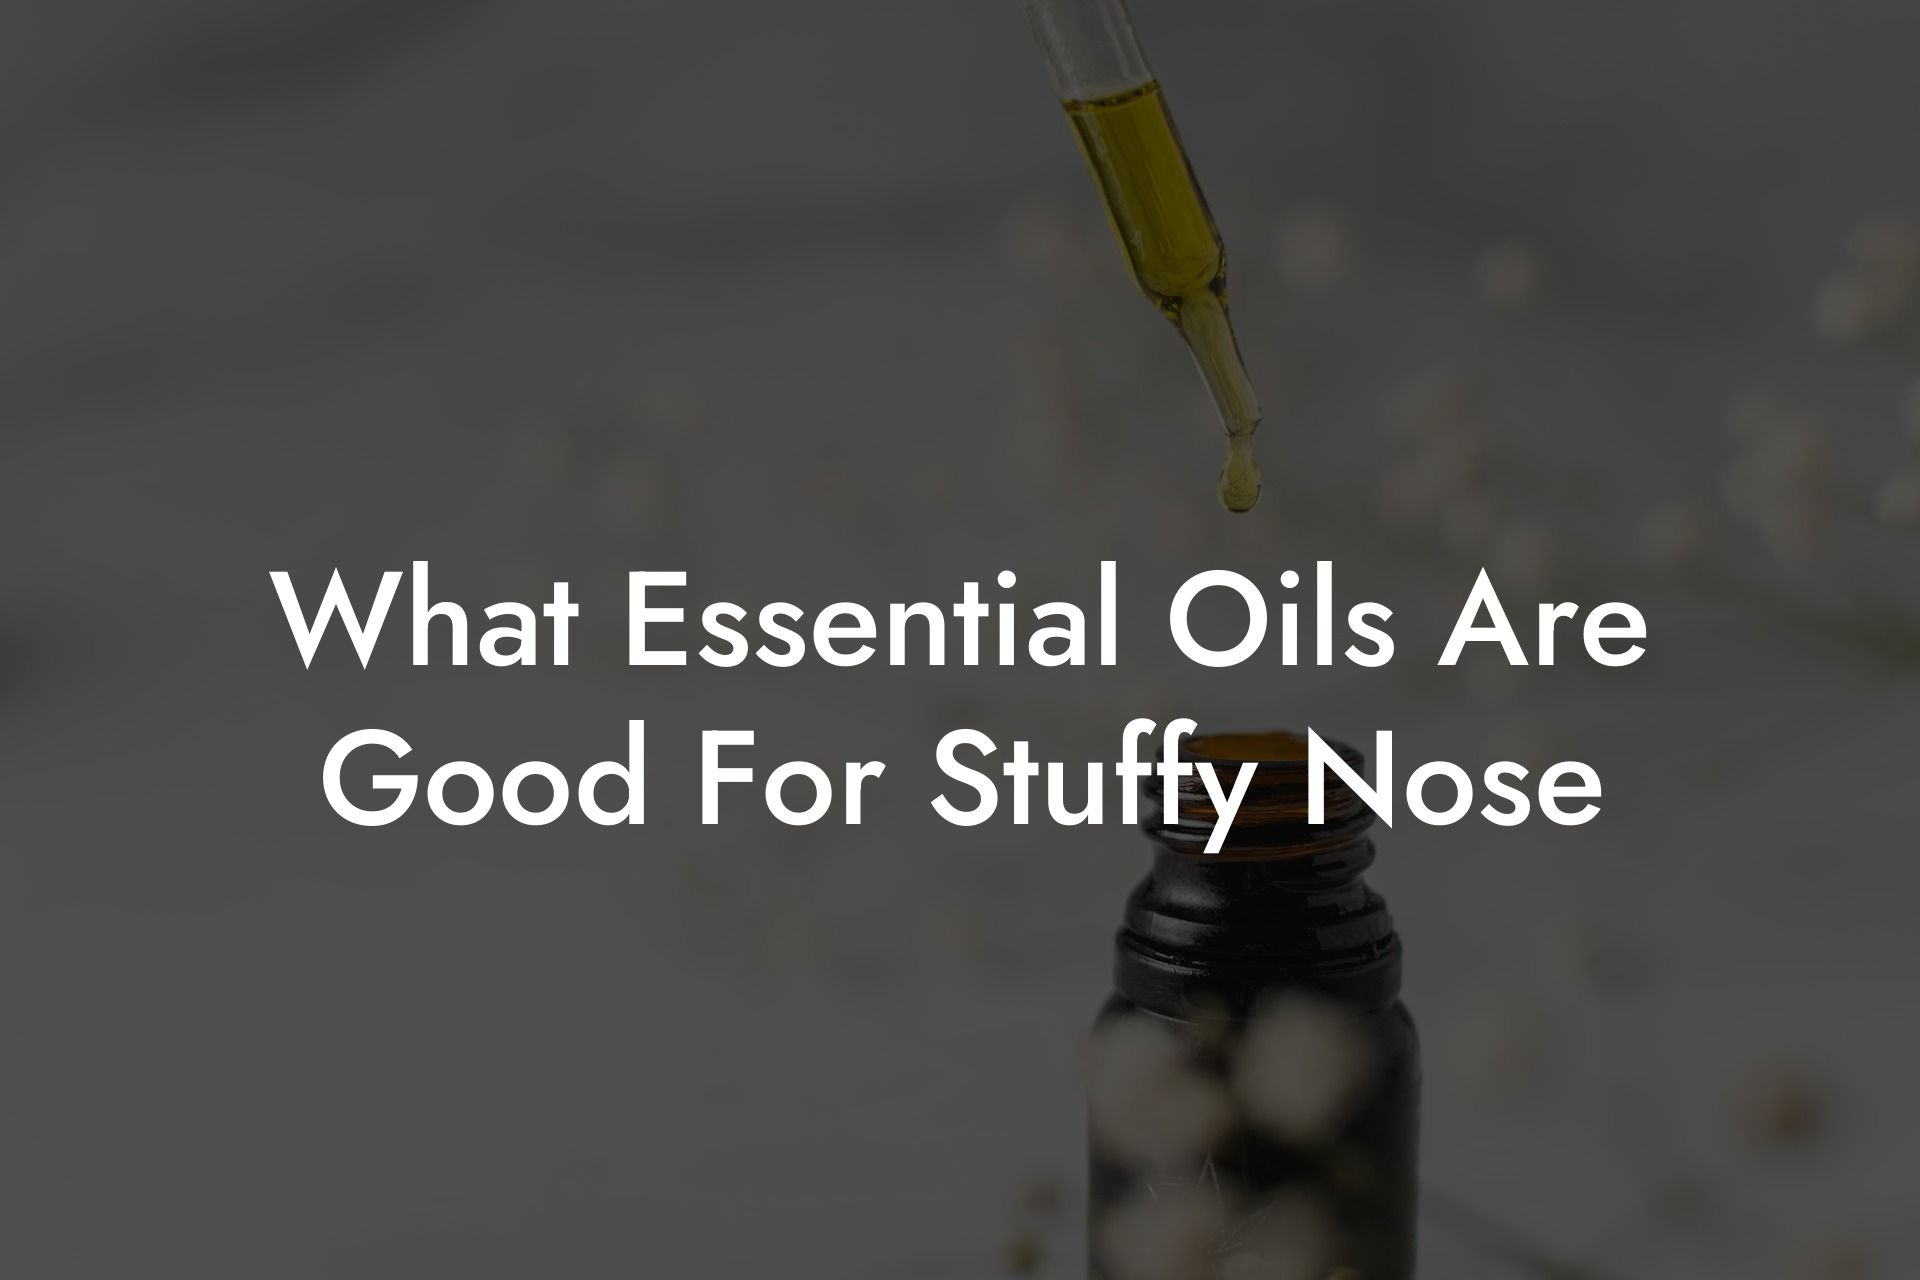 What Essential Oils Are Good For Stuffy Nose